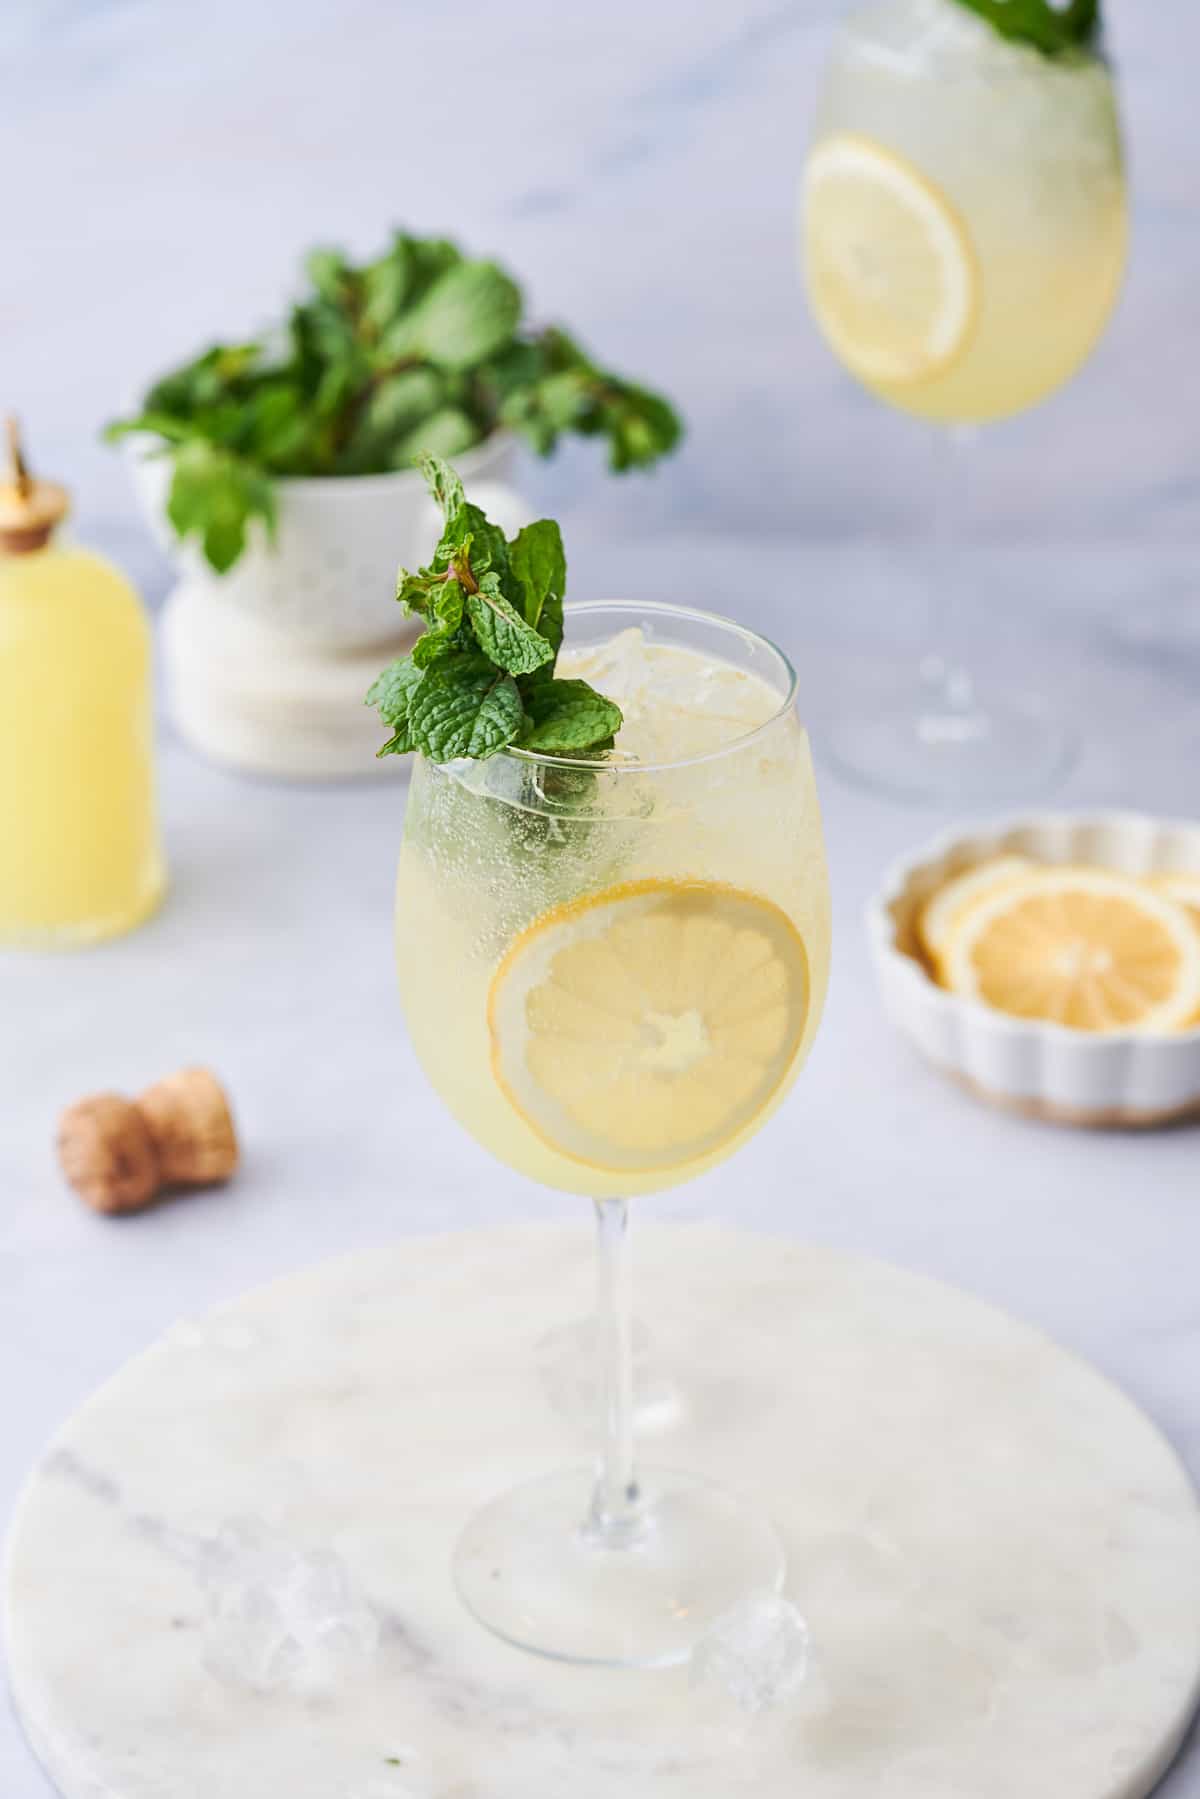 stunning photo of a pale yellow limoncello spritz with fresh lemon rounds and mint sprigs. 